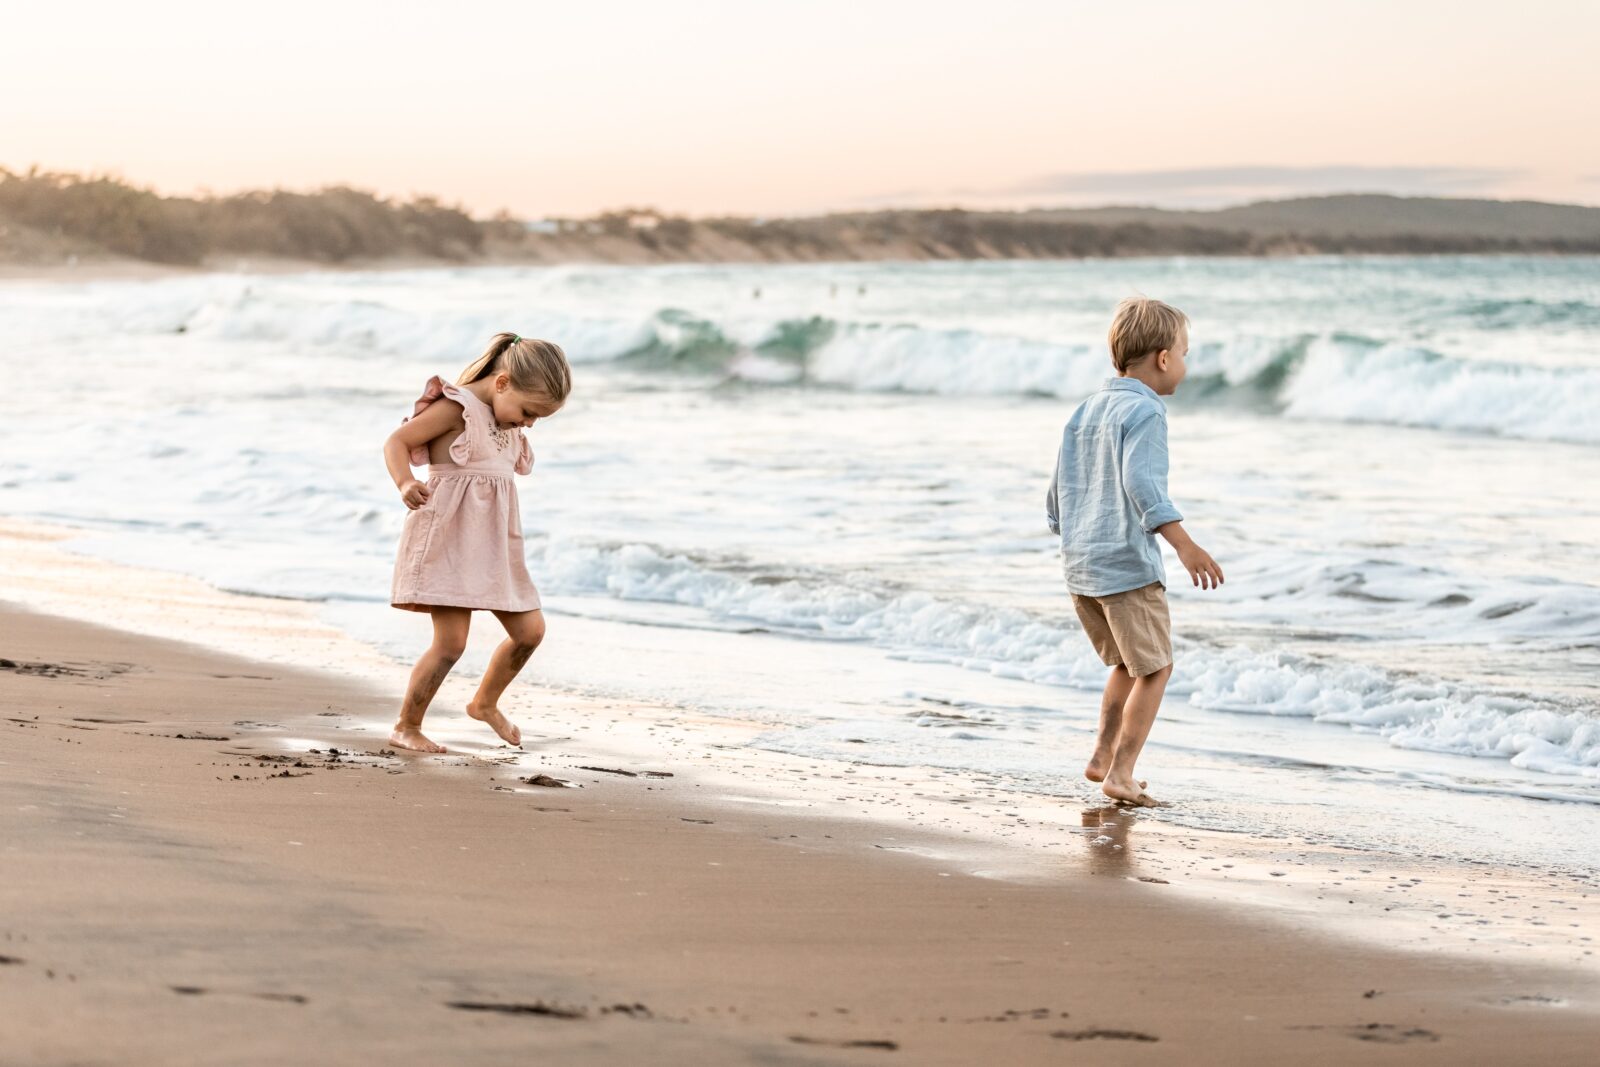 Beautiful sunset lit beaches and your kids photographed playing naturally